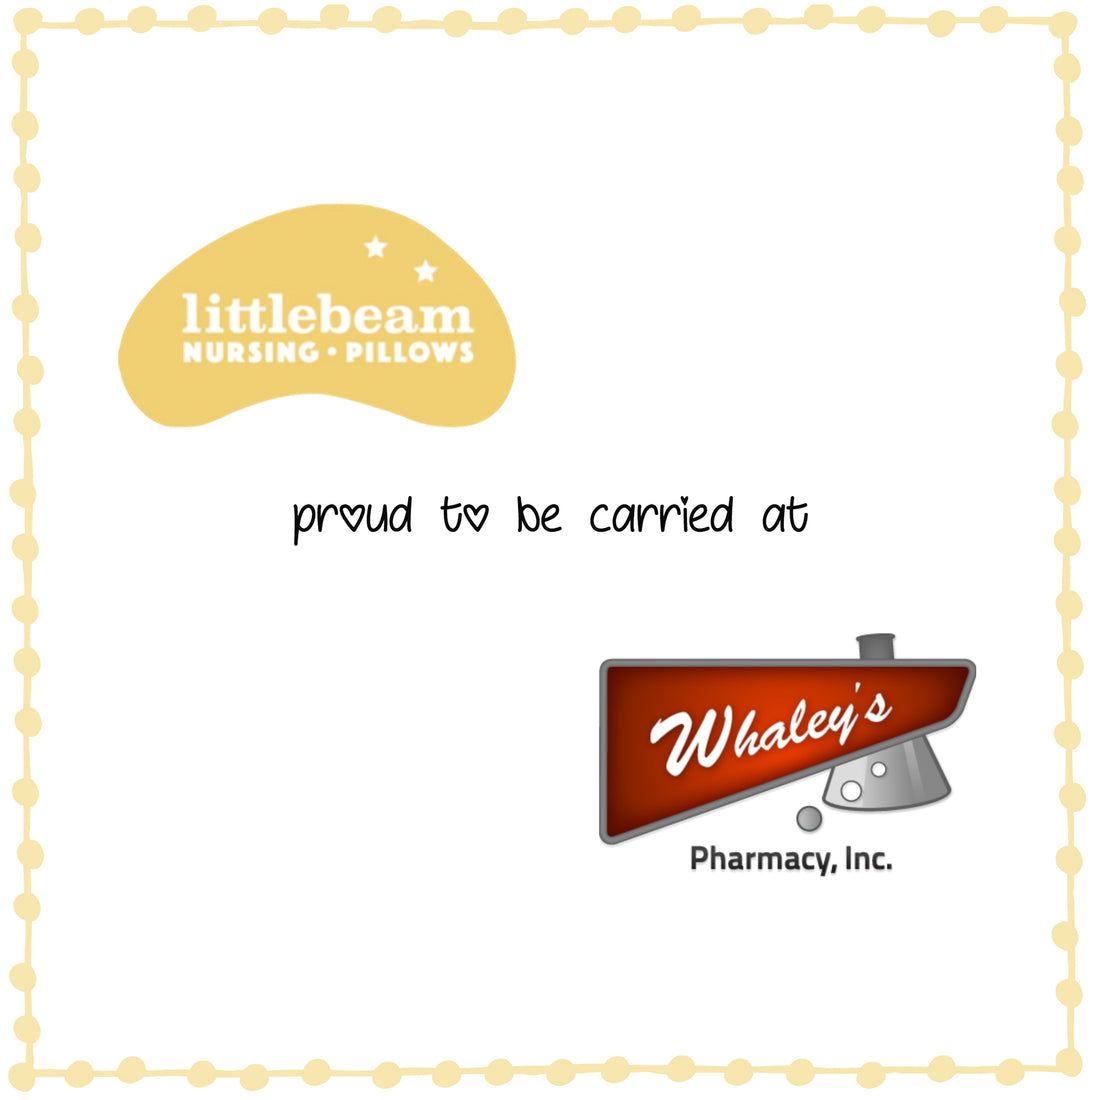 A Warm Welcome to Whaley's Pharmacy!